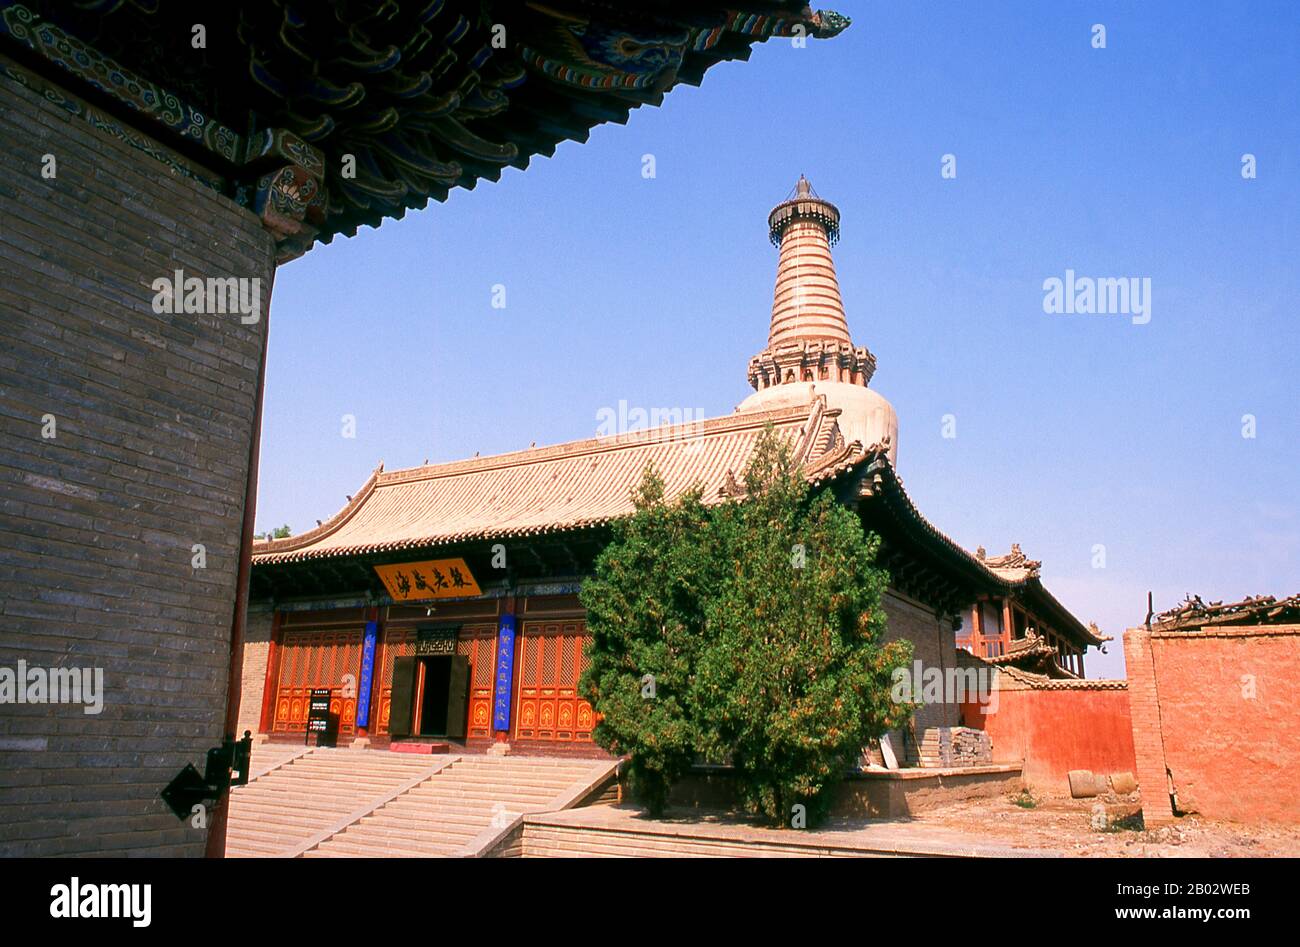 Zhangye is an important light industrial and agricultural centre at the heart of the Hexi Corridor with a population of about 200,000. It was originally an important garrison town designed to protect Silk Road traffic and keep the troublesome nomadic invaders out of China Proper. Stock Photo